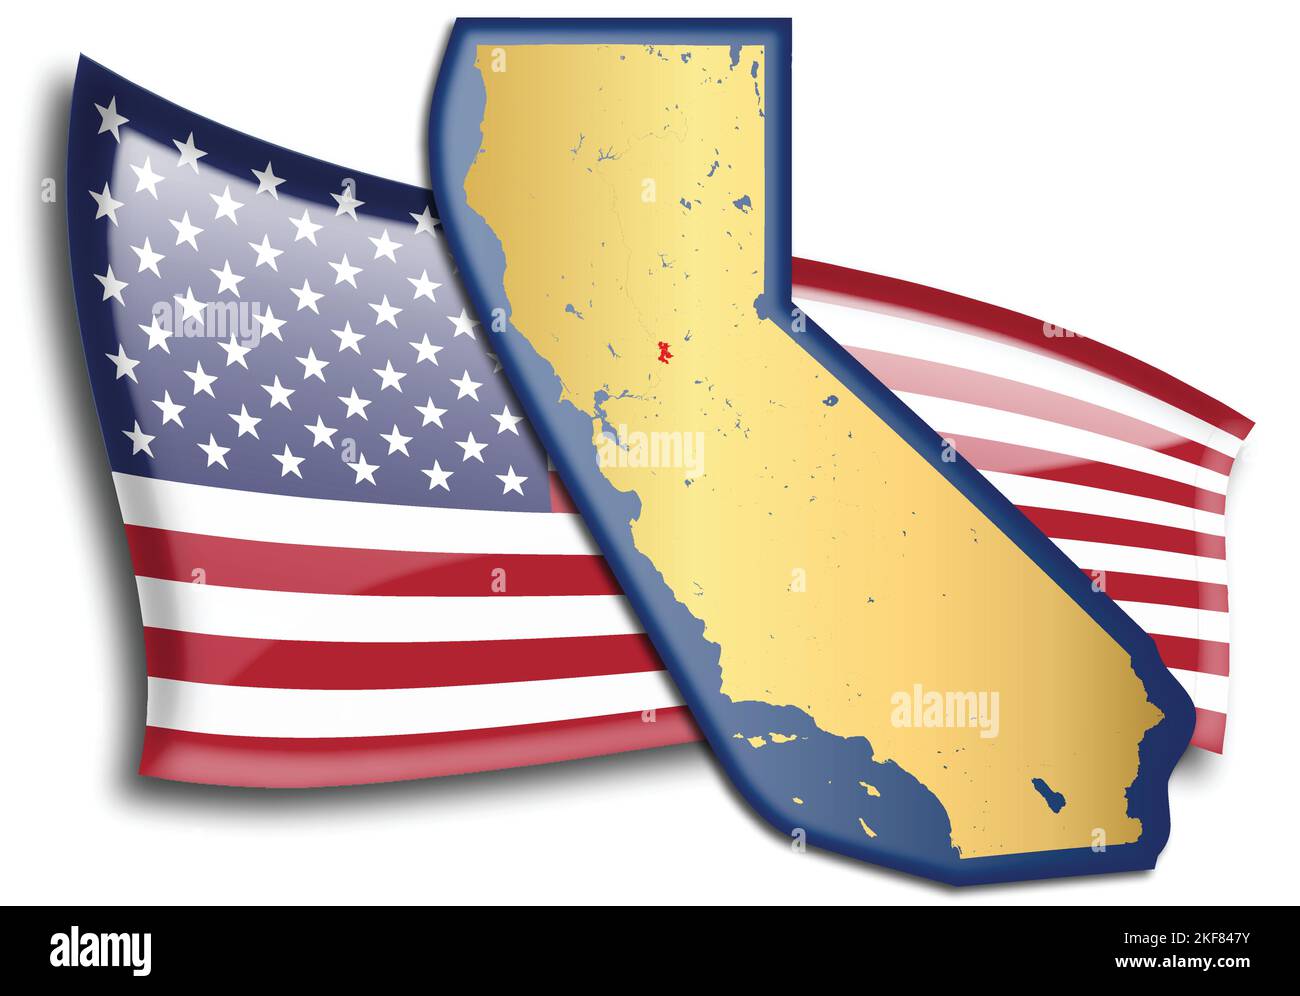 U.S. states - map of California against an American flag. Rivers and lakes are shown on the map. American Flag and State Map can be used separately an Stock Vector